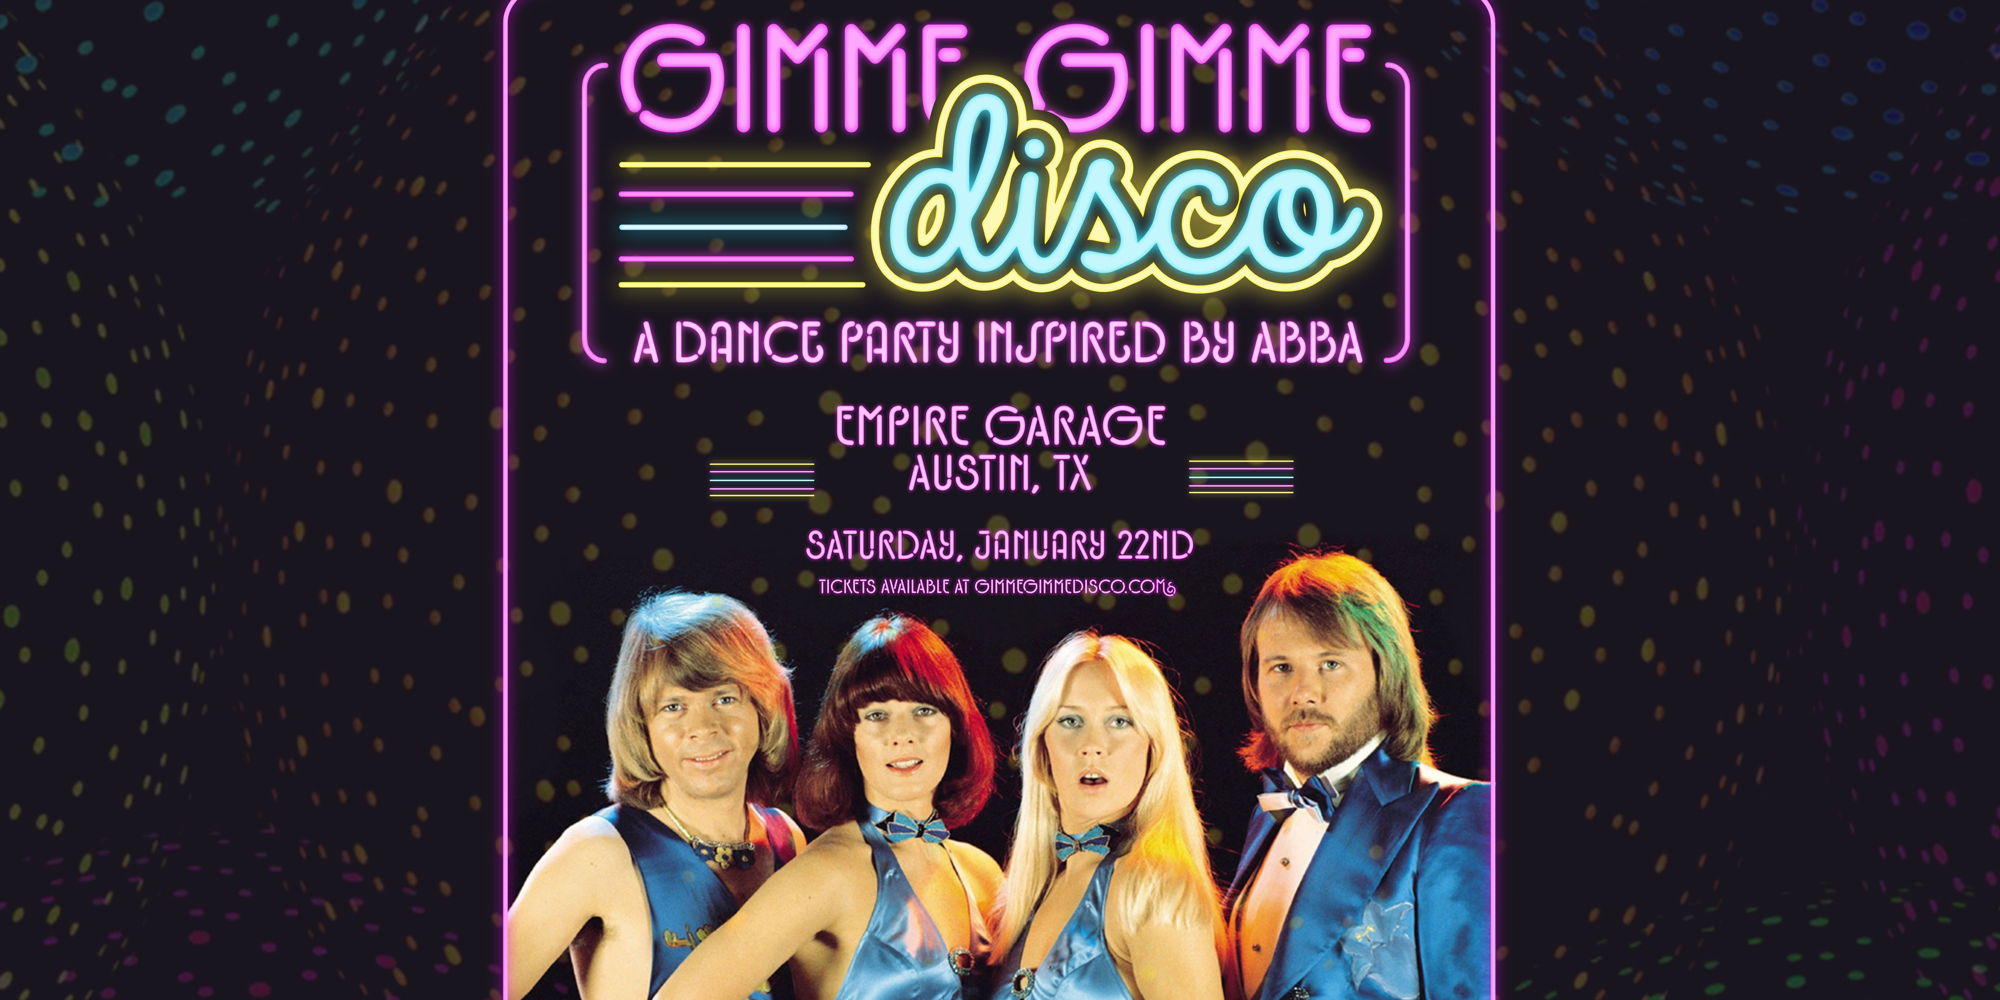 Gimme Gimme Disco - A Dance Party Inspired by Abba at Empire Garage on January 22nd promotional image